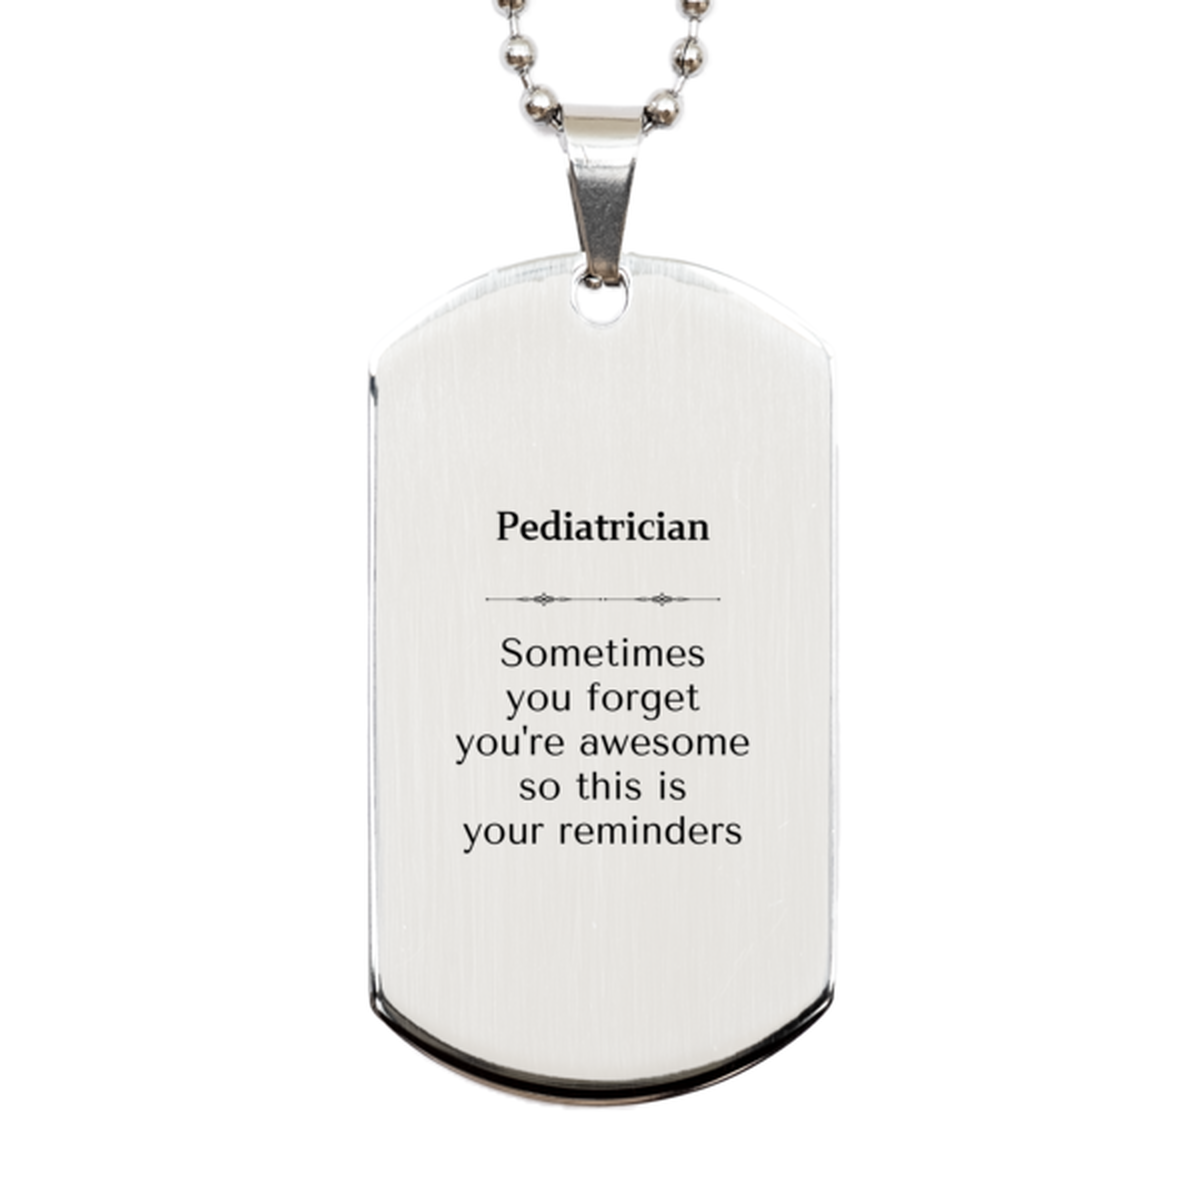 Sentimental Pediatrician Silver Dog Tag, Pediatrician Sometimes you forget you're awesome so this is your reminders, Graduation Christmas Birthday Gifts for Pediatrician, Men, Women, Coworkers